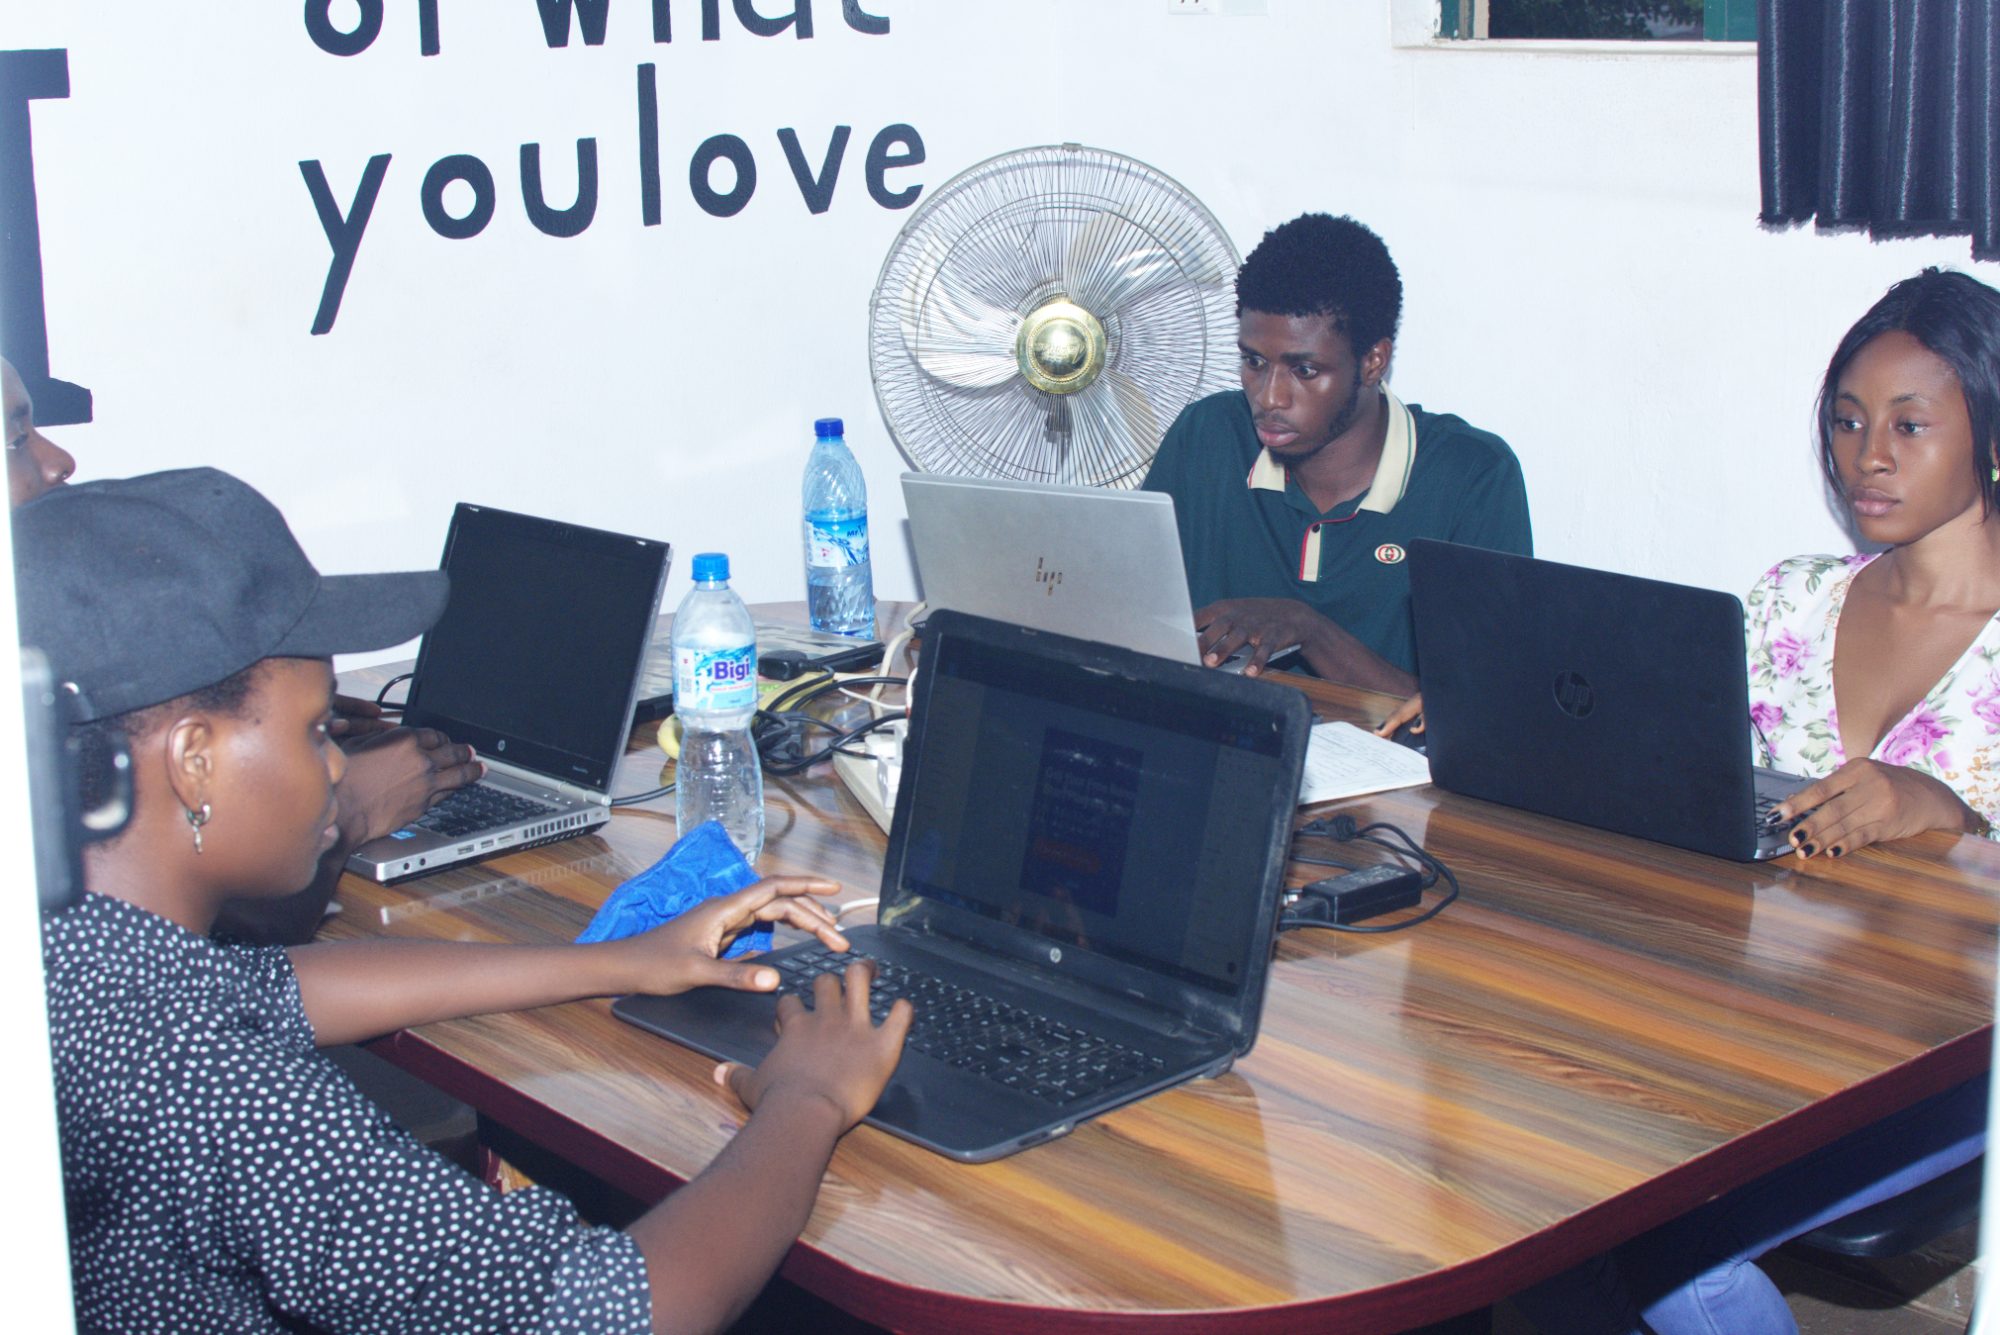 Best place to learn Video editing in Ondo state, Nigeria, Coworking space in Akure, Ondo State, Nigeria